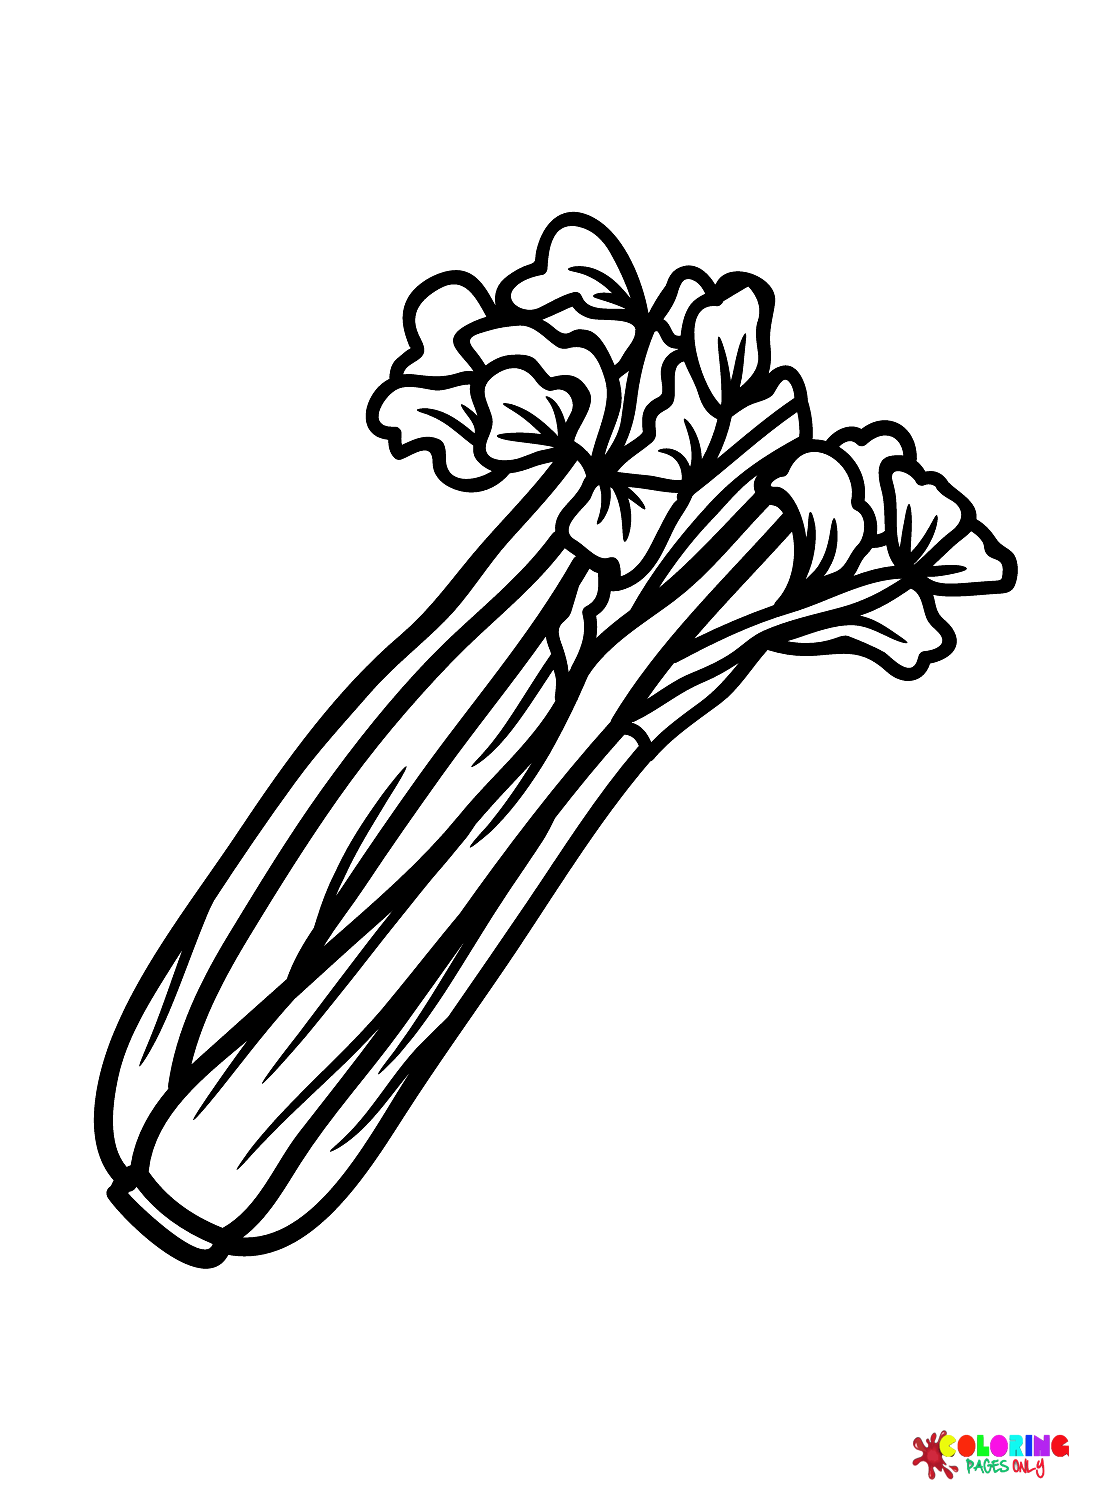 Celery coloring pages printable for free download